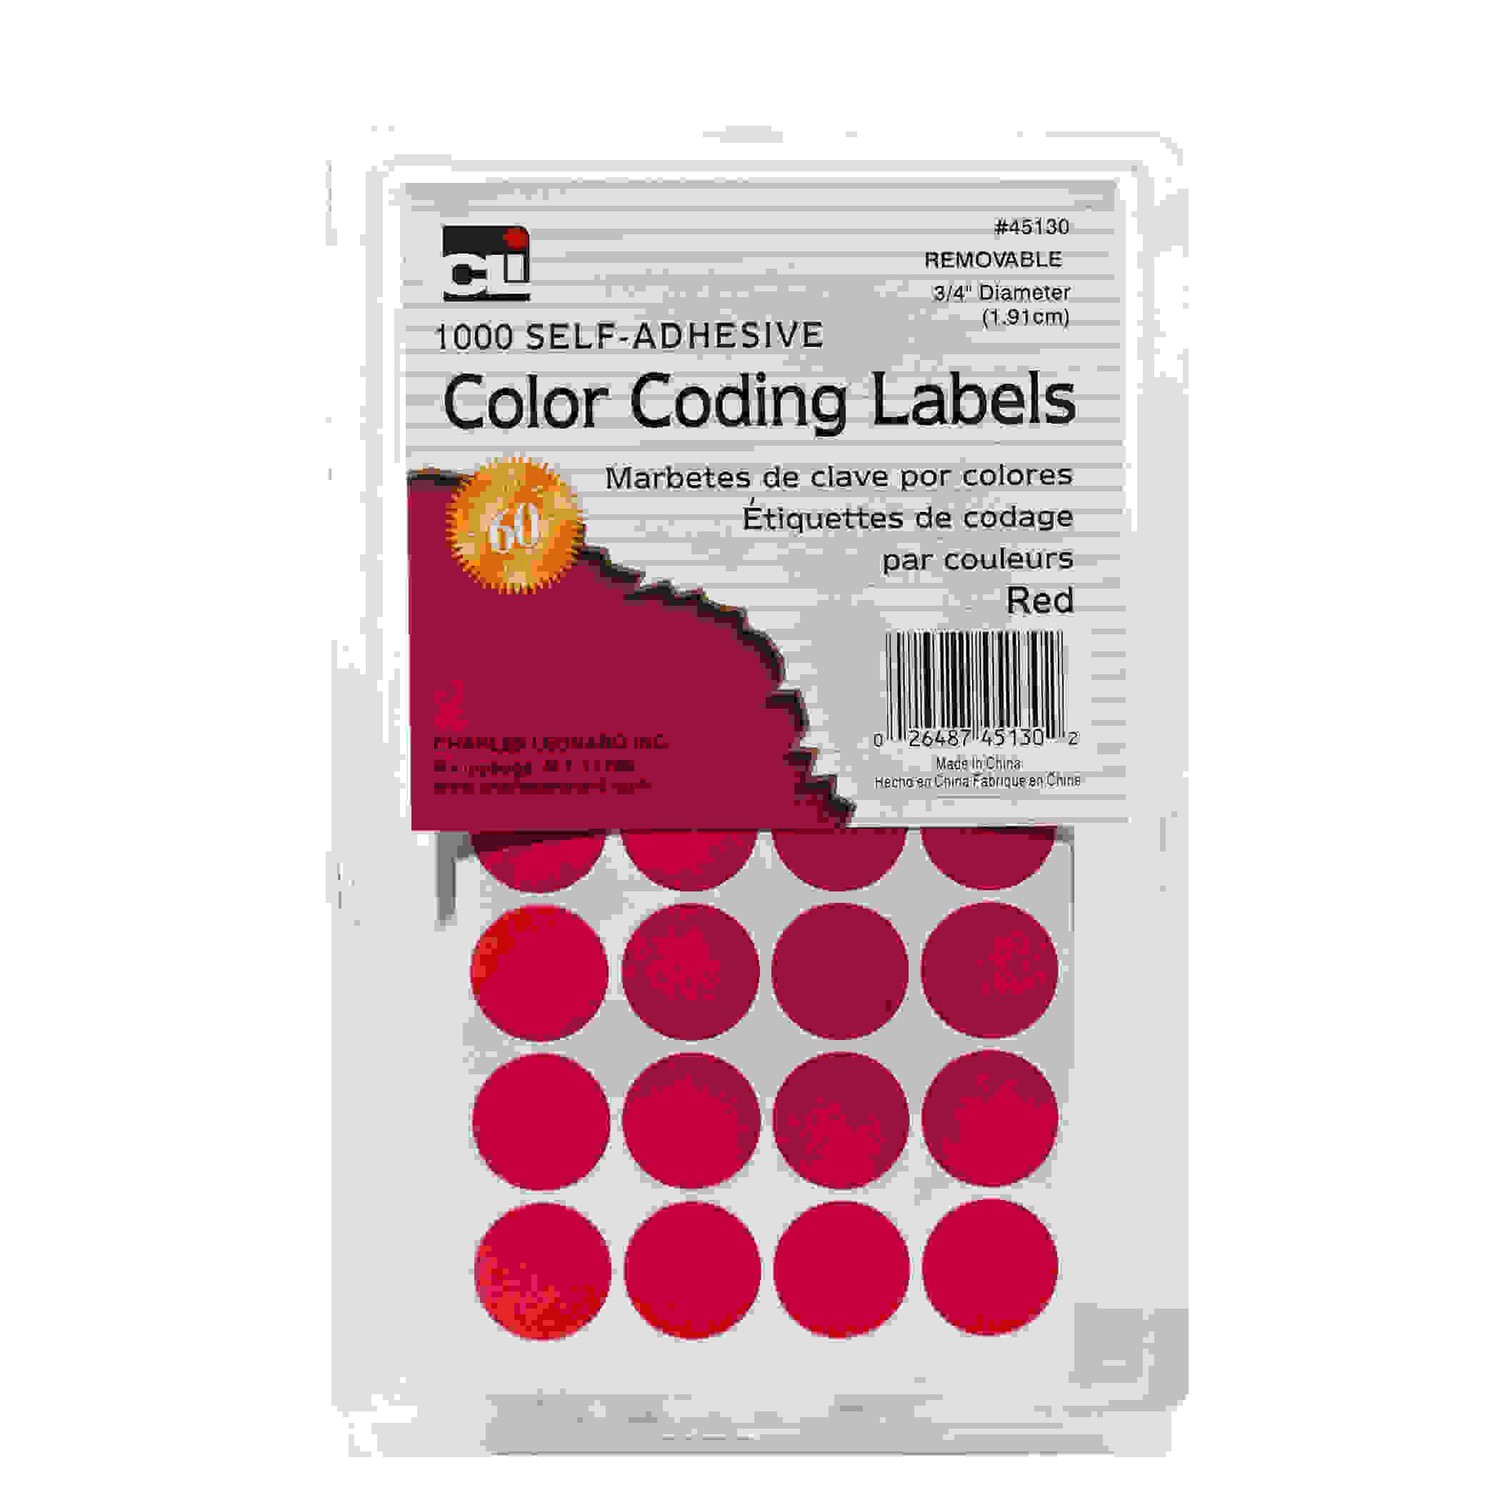 Color Coding Dots, Self-Adhesive Labels, 0.75 Inch Diameter, Red, Box of 1000